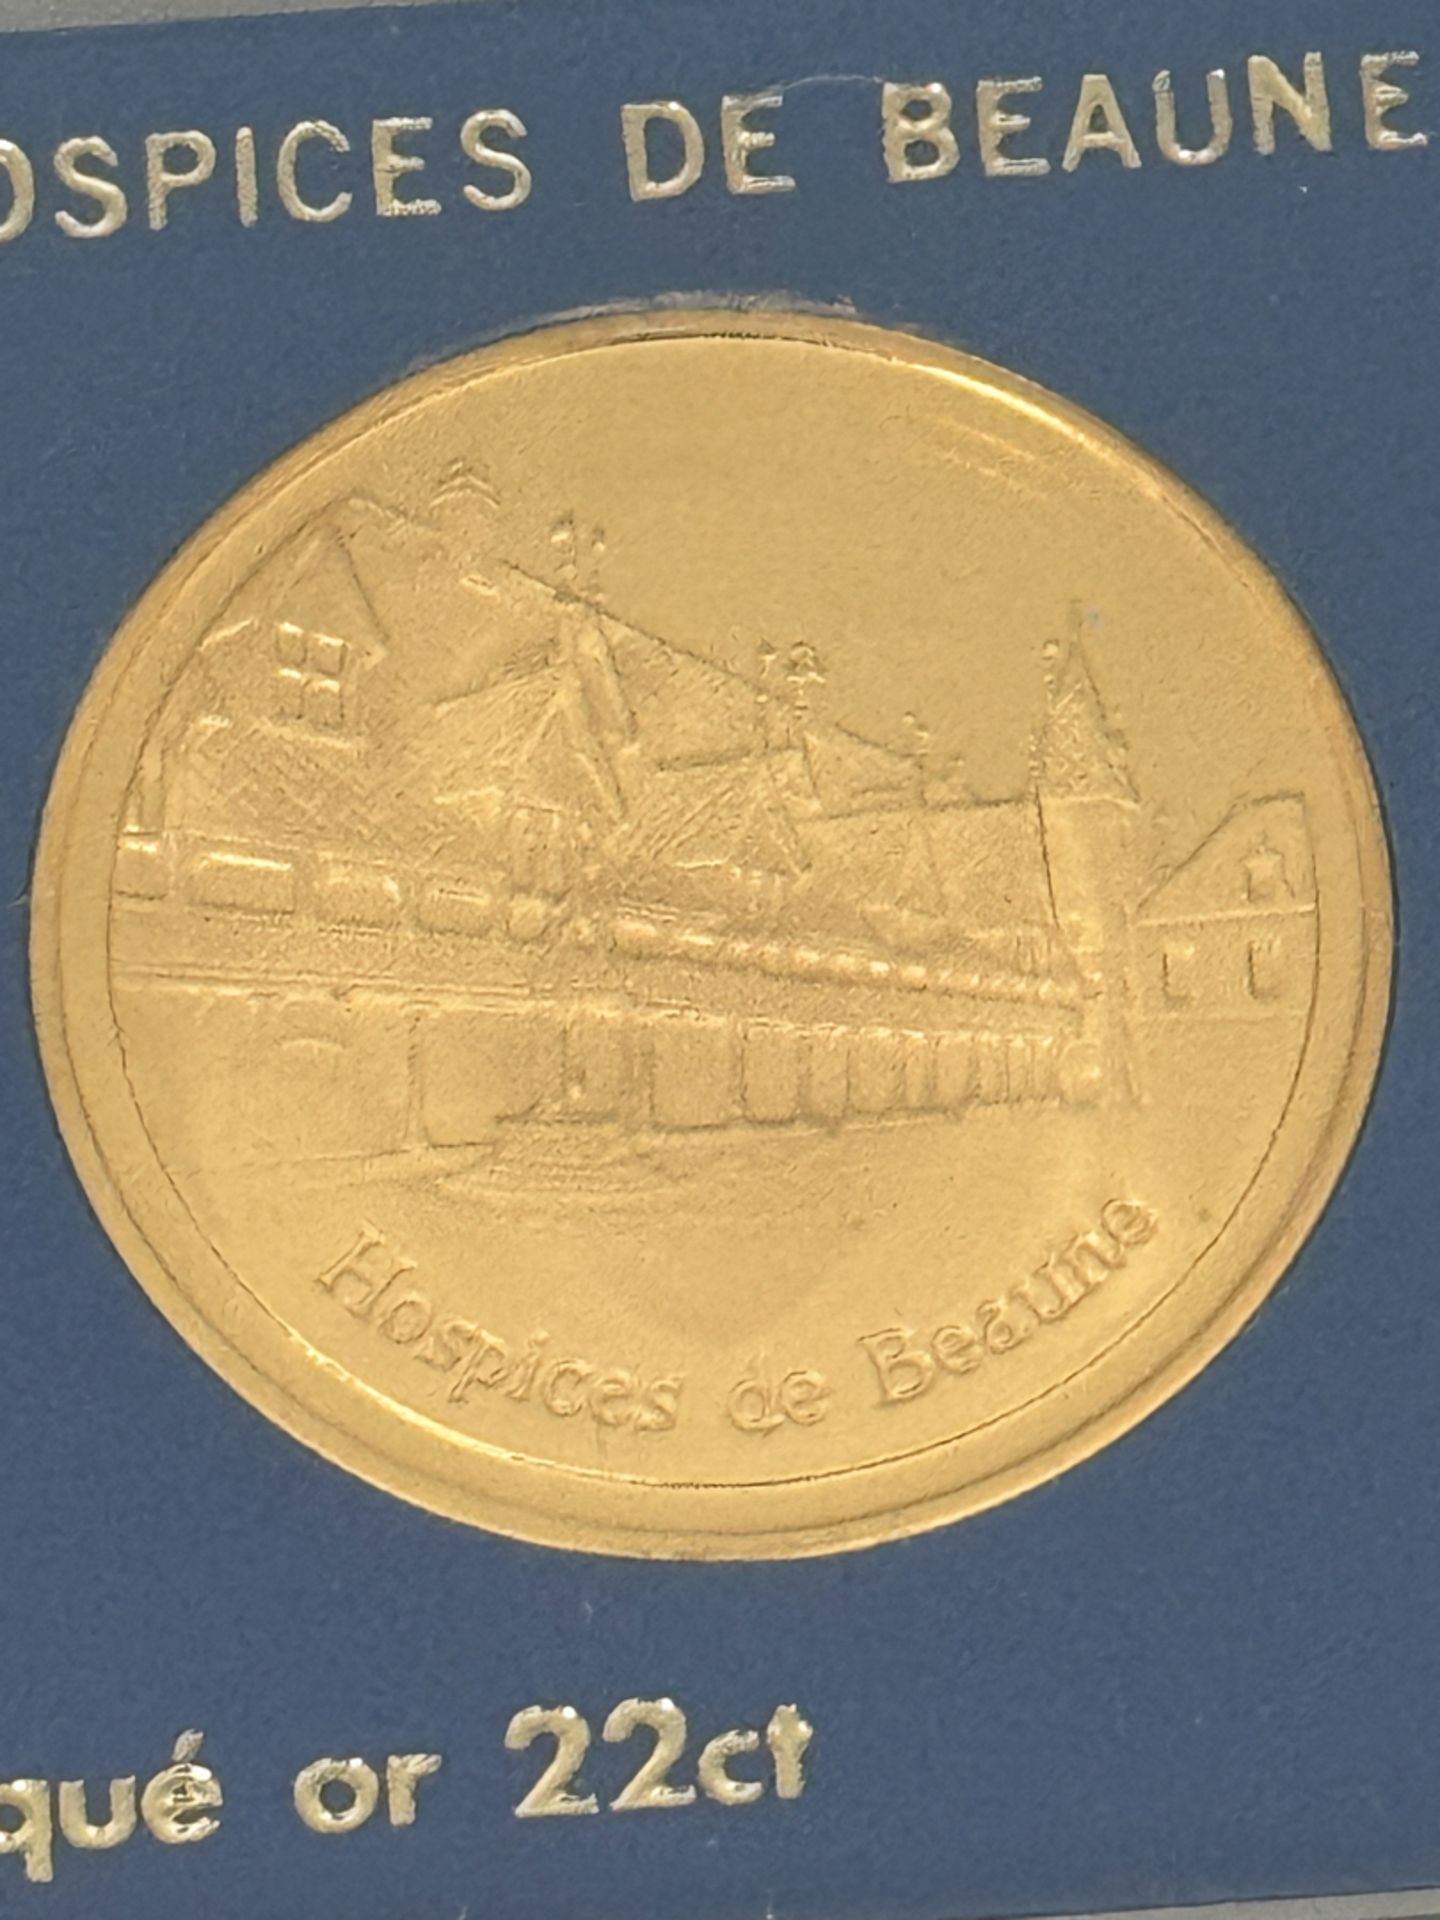 Beaune Hospices 22ct Gold Plated Coin / Medal - Image 3 of 4